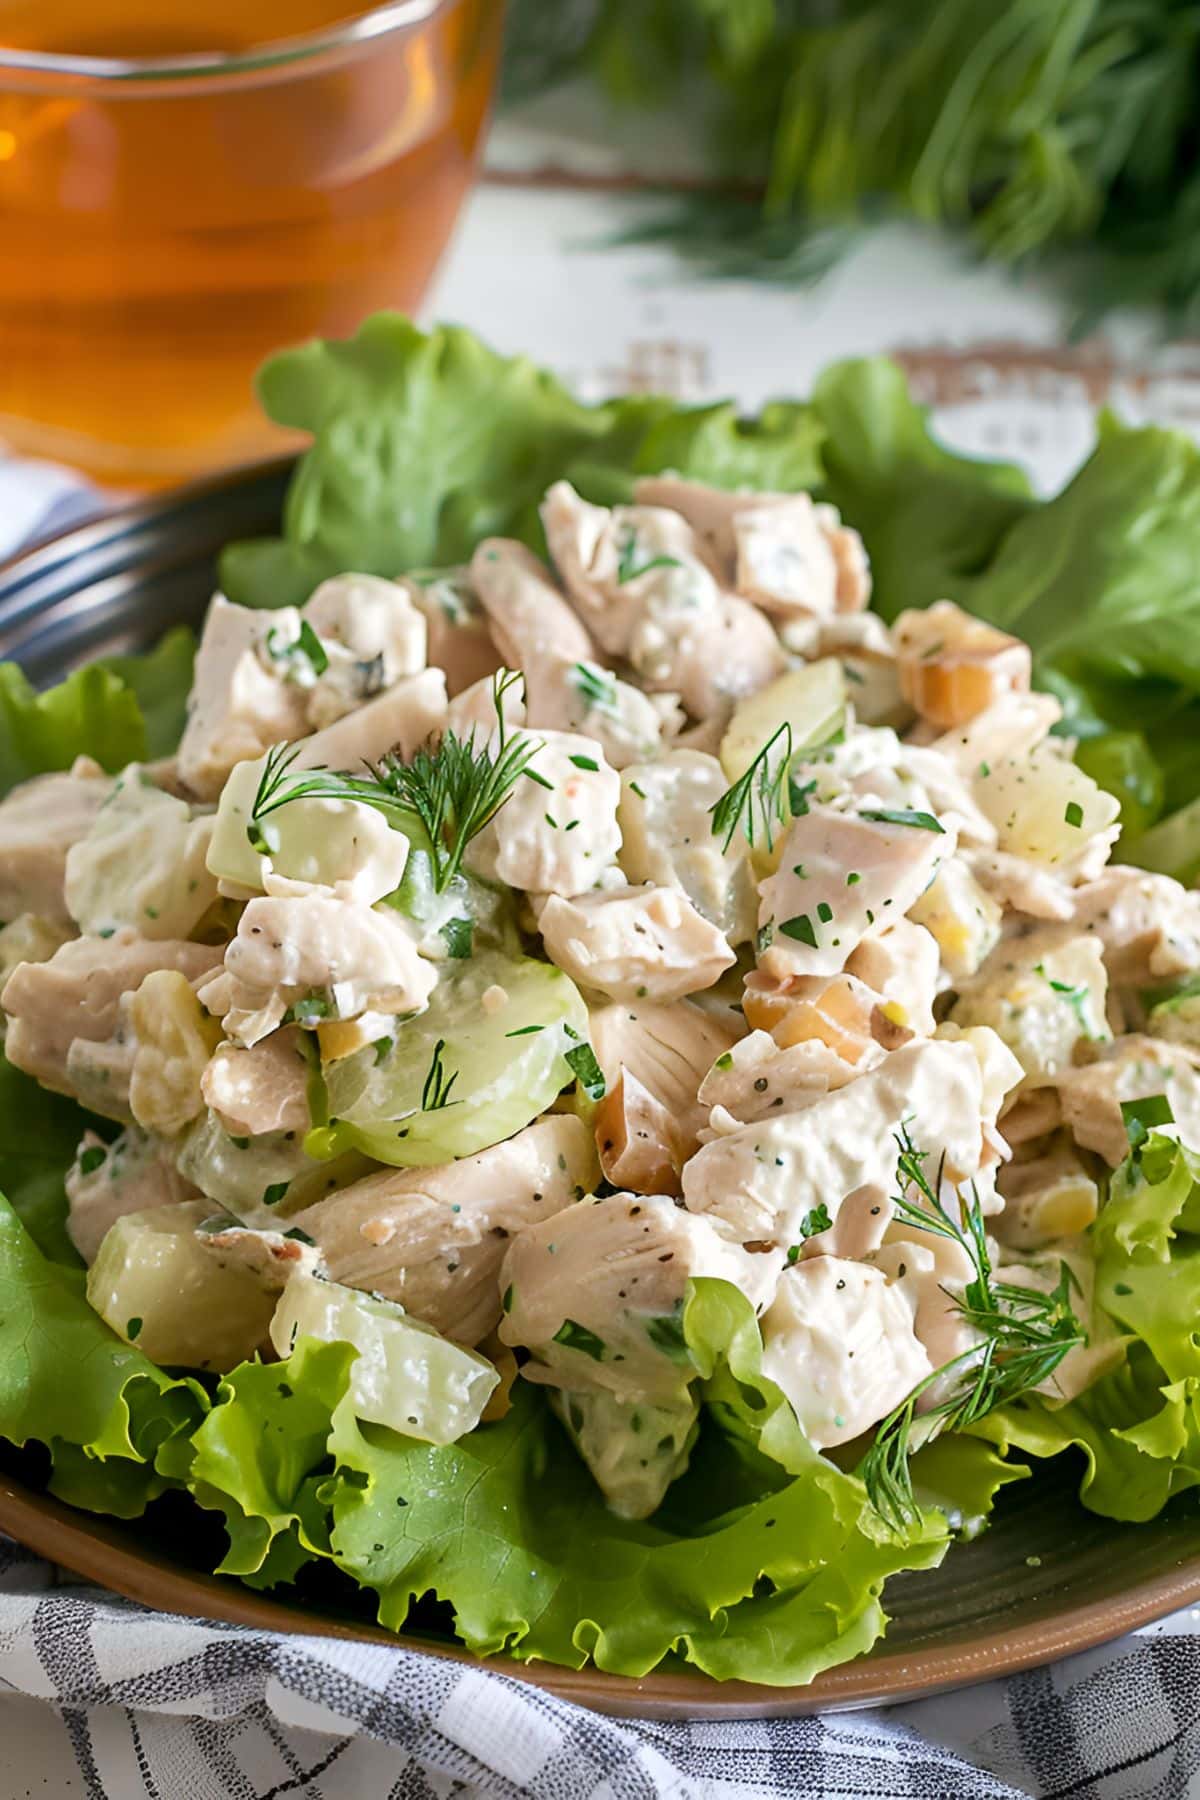 Close Up of Ina Garten's Chicken Salad with Chicken, Dill, Celery, and Mayo on a Bed of Lettuce with a Glass of Tea in the Background